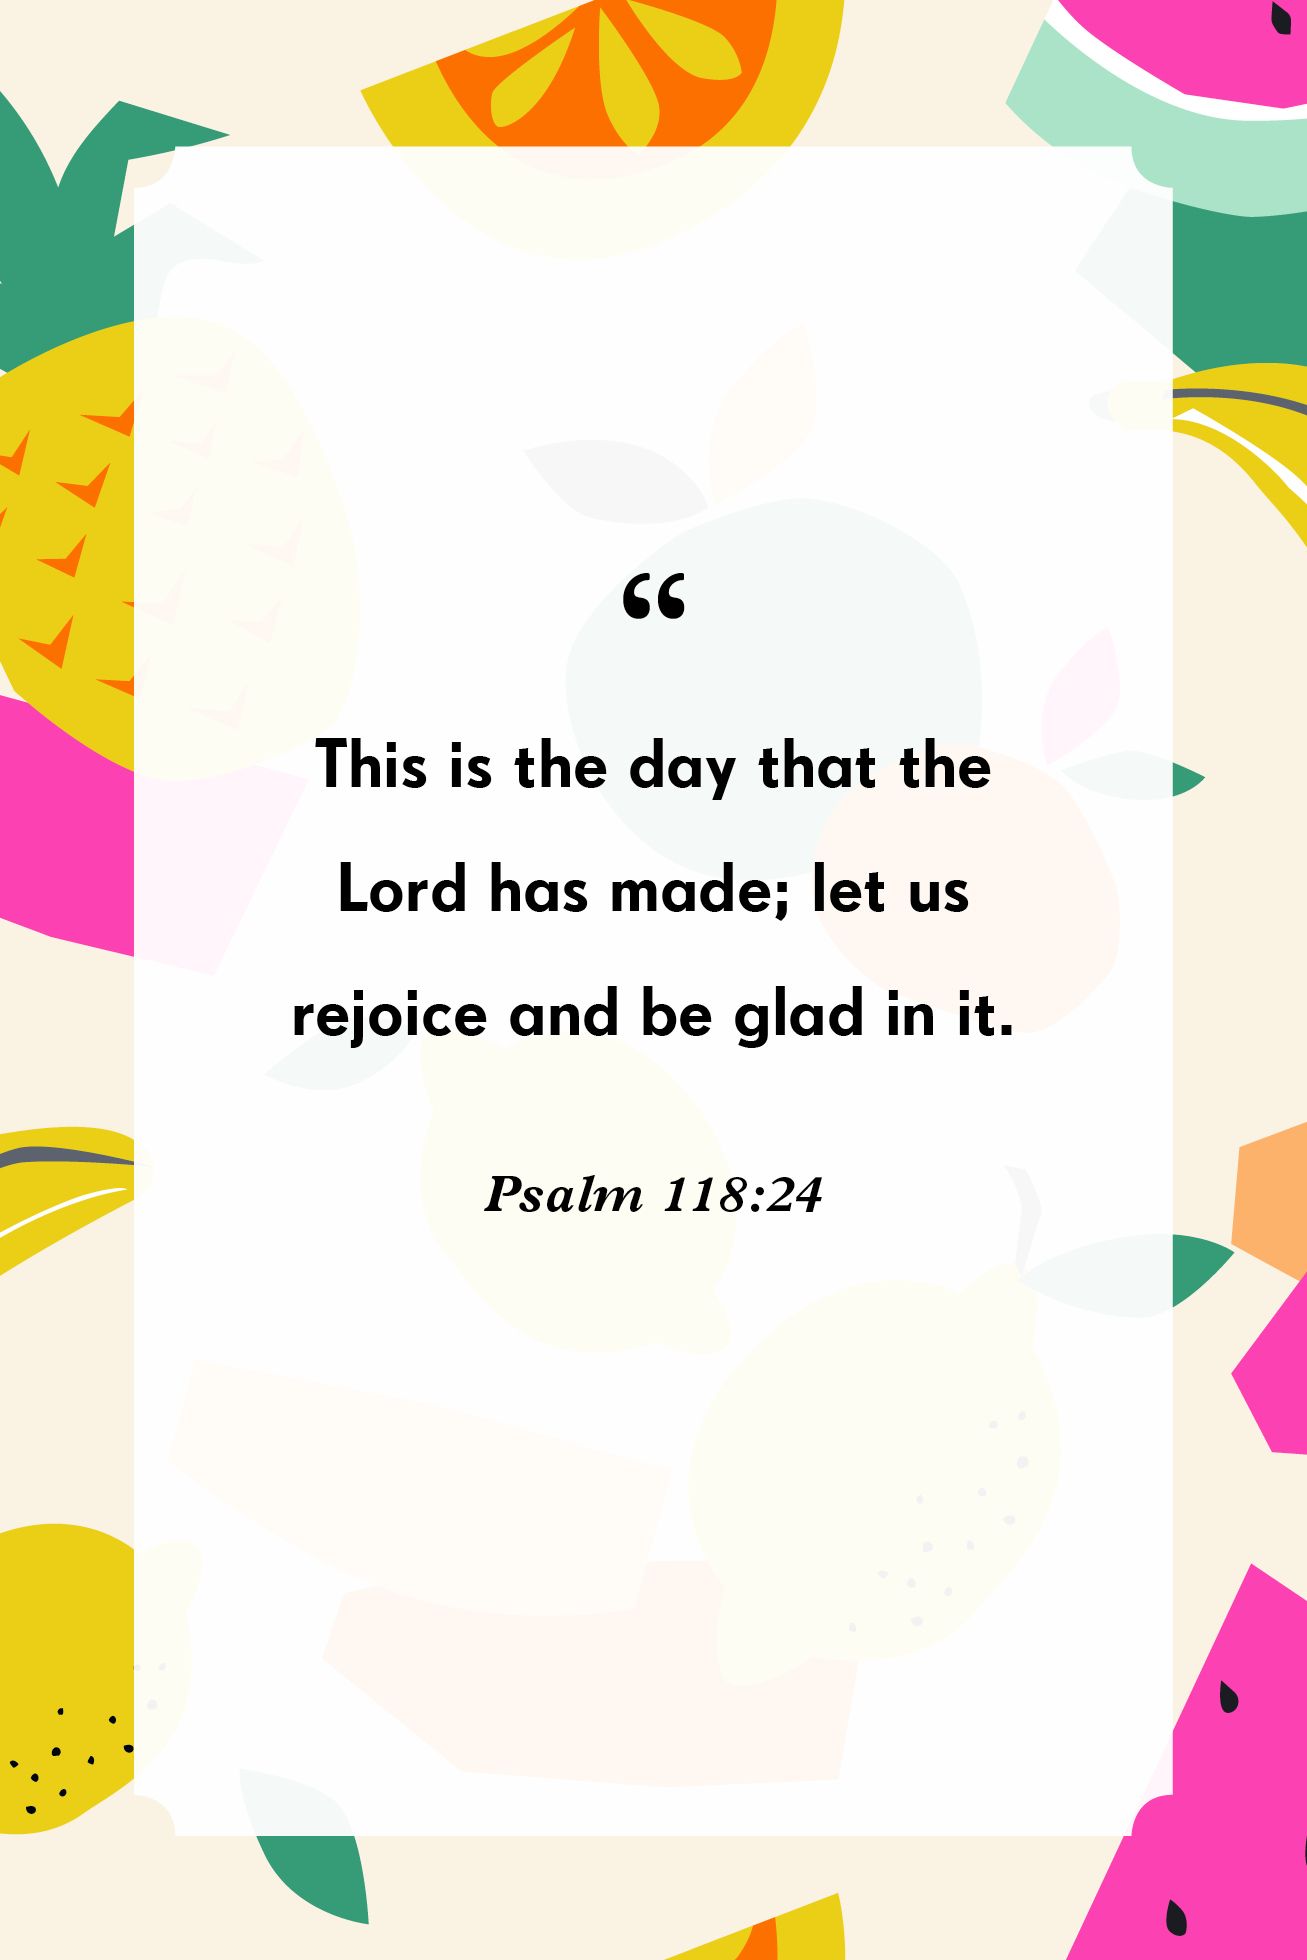 27 Bible Verses for Birthday to Share with Friends and Family